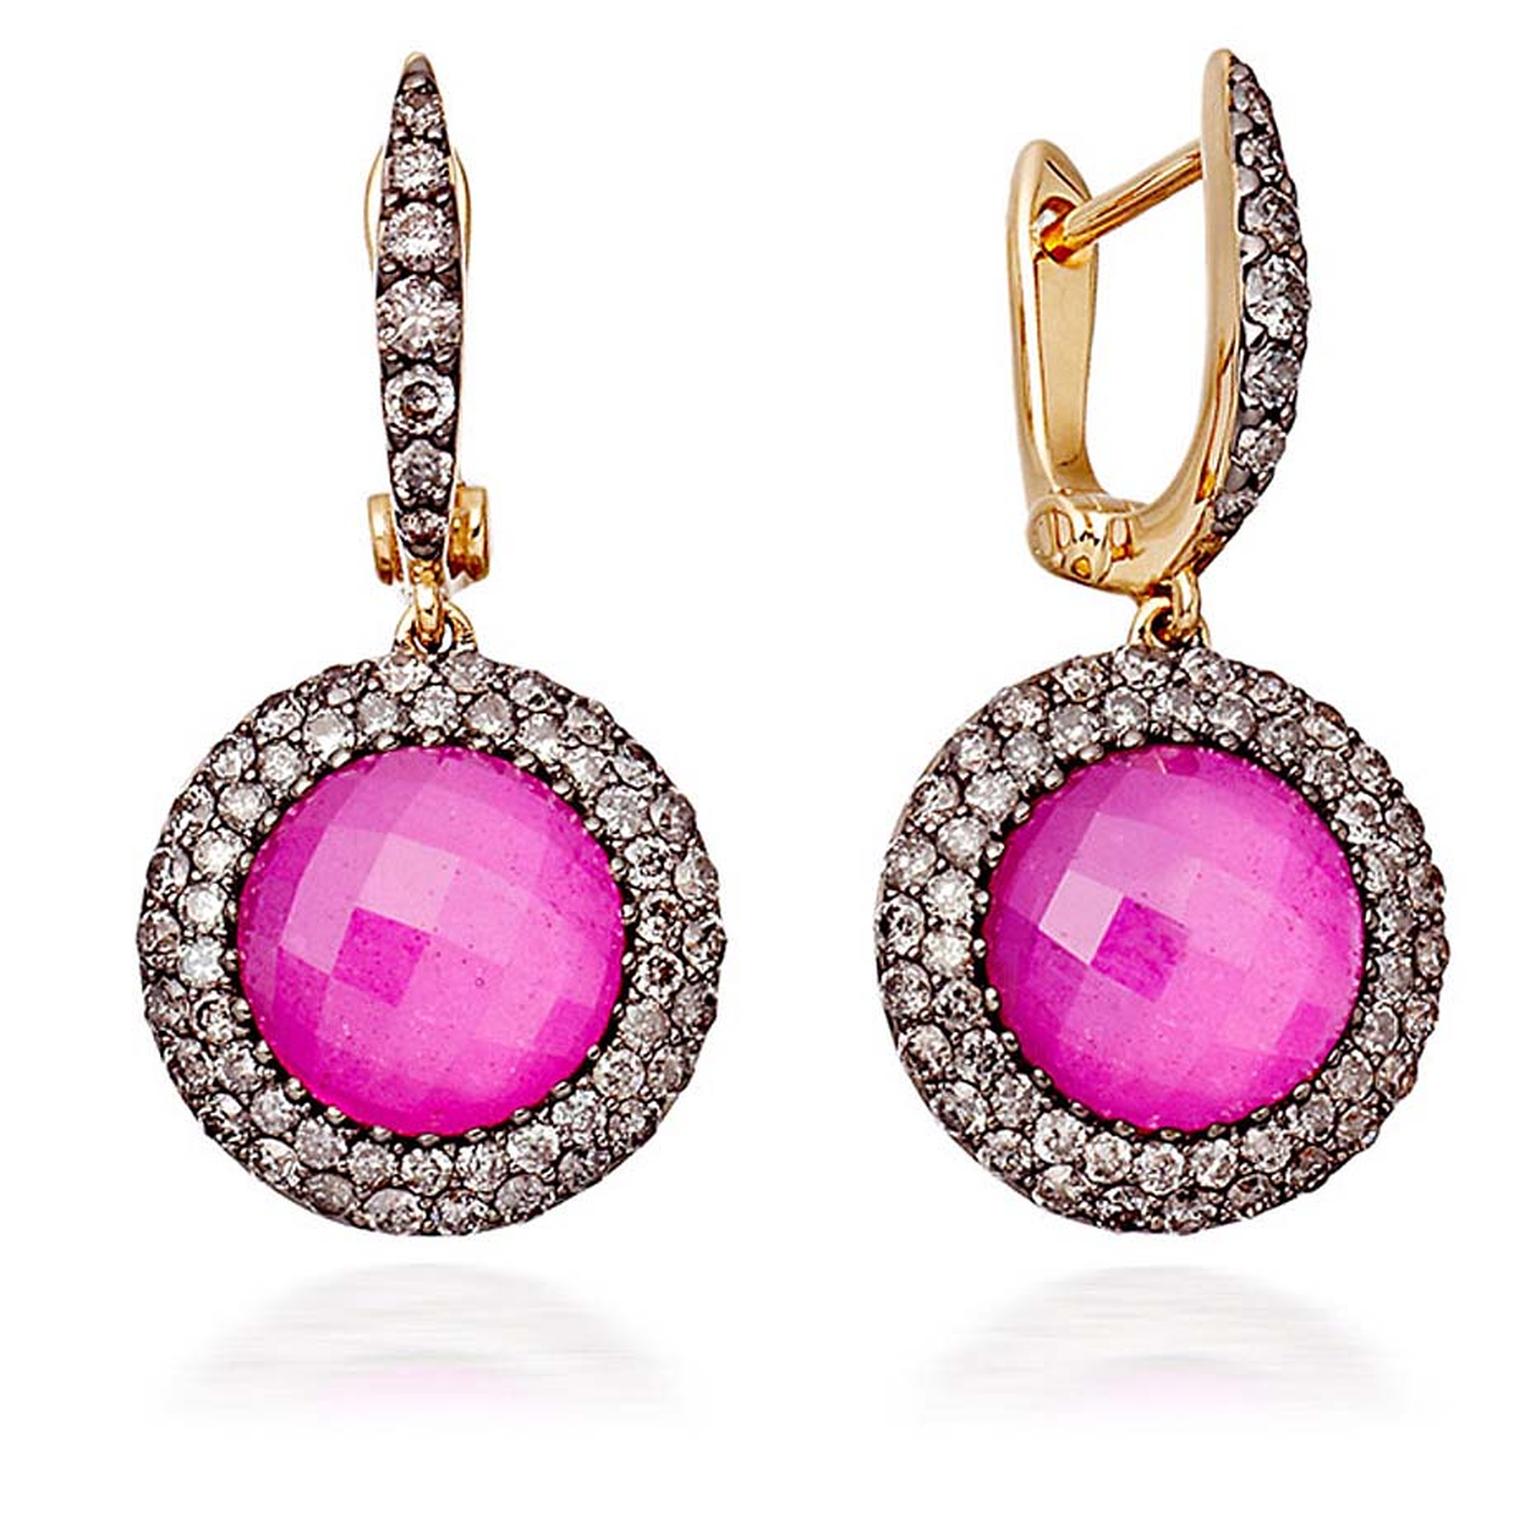 Astley Clarke Mini Connie ruby earrings in black rhodium-plated yellow gold with rubies and pavé grey diamonds. £ 3,950.